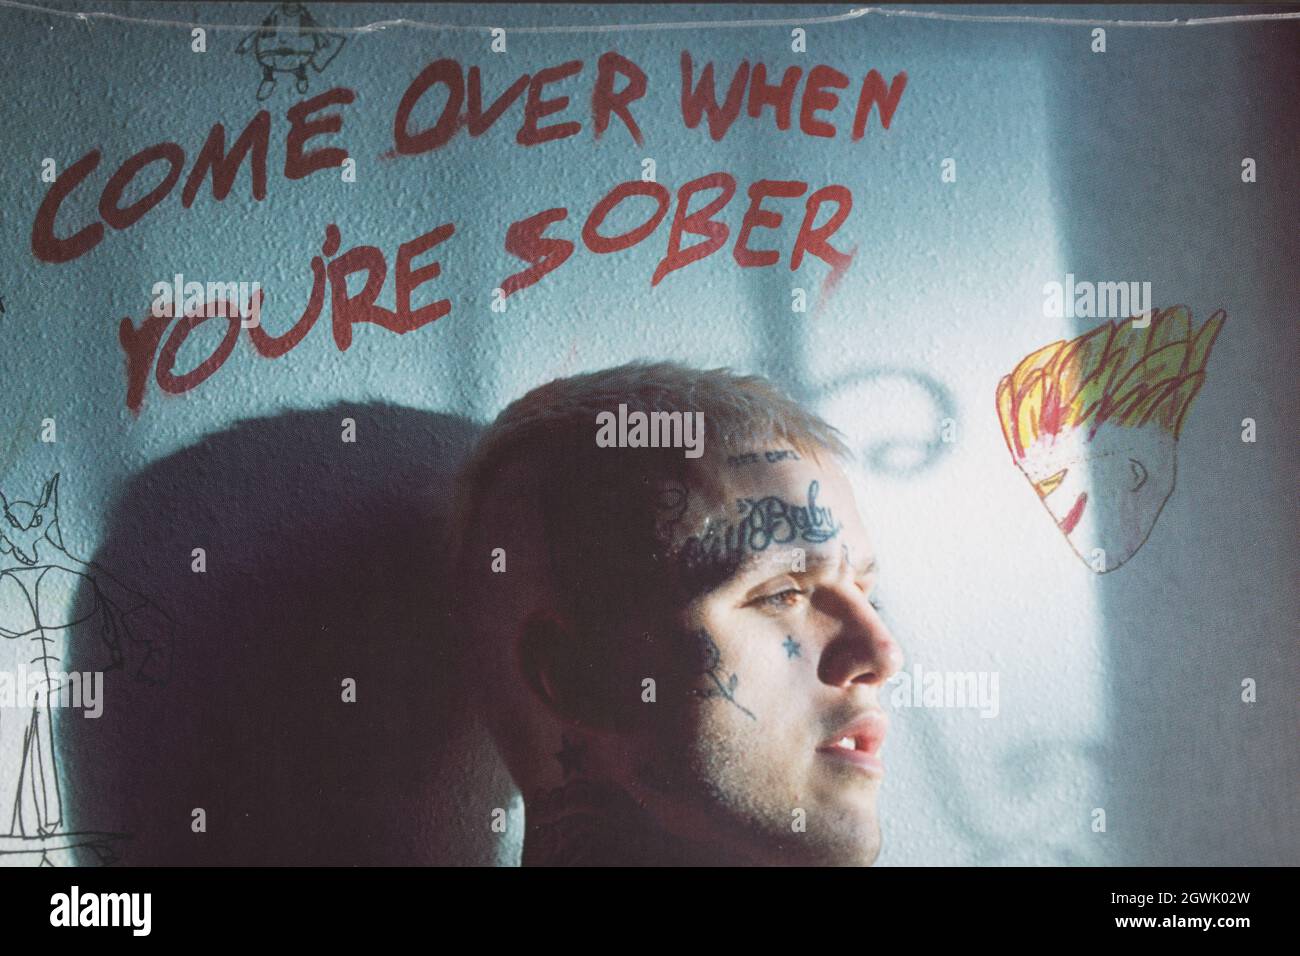 Moscow, Russia - October 3, 2021: Close up of the album cover of american rapper Lil Peep Come over when you're sober. Sealed vinyl record. Stock Photo